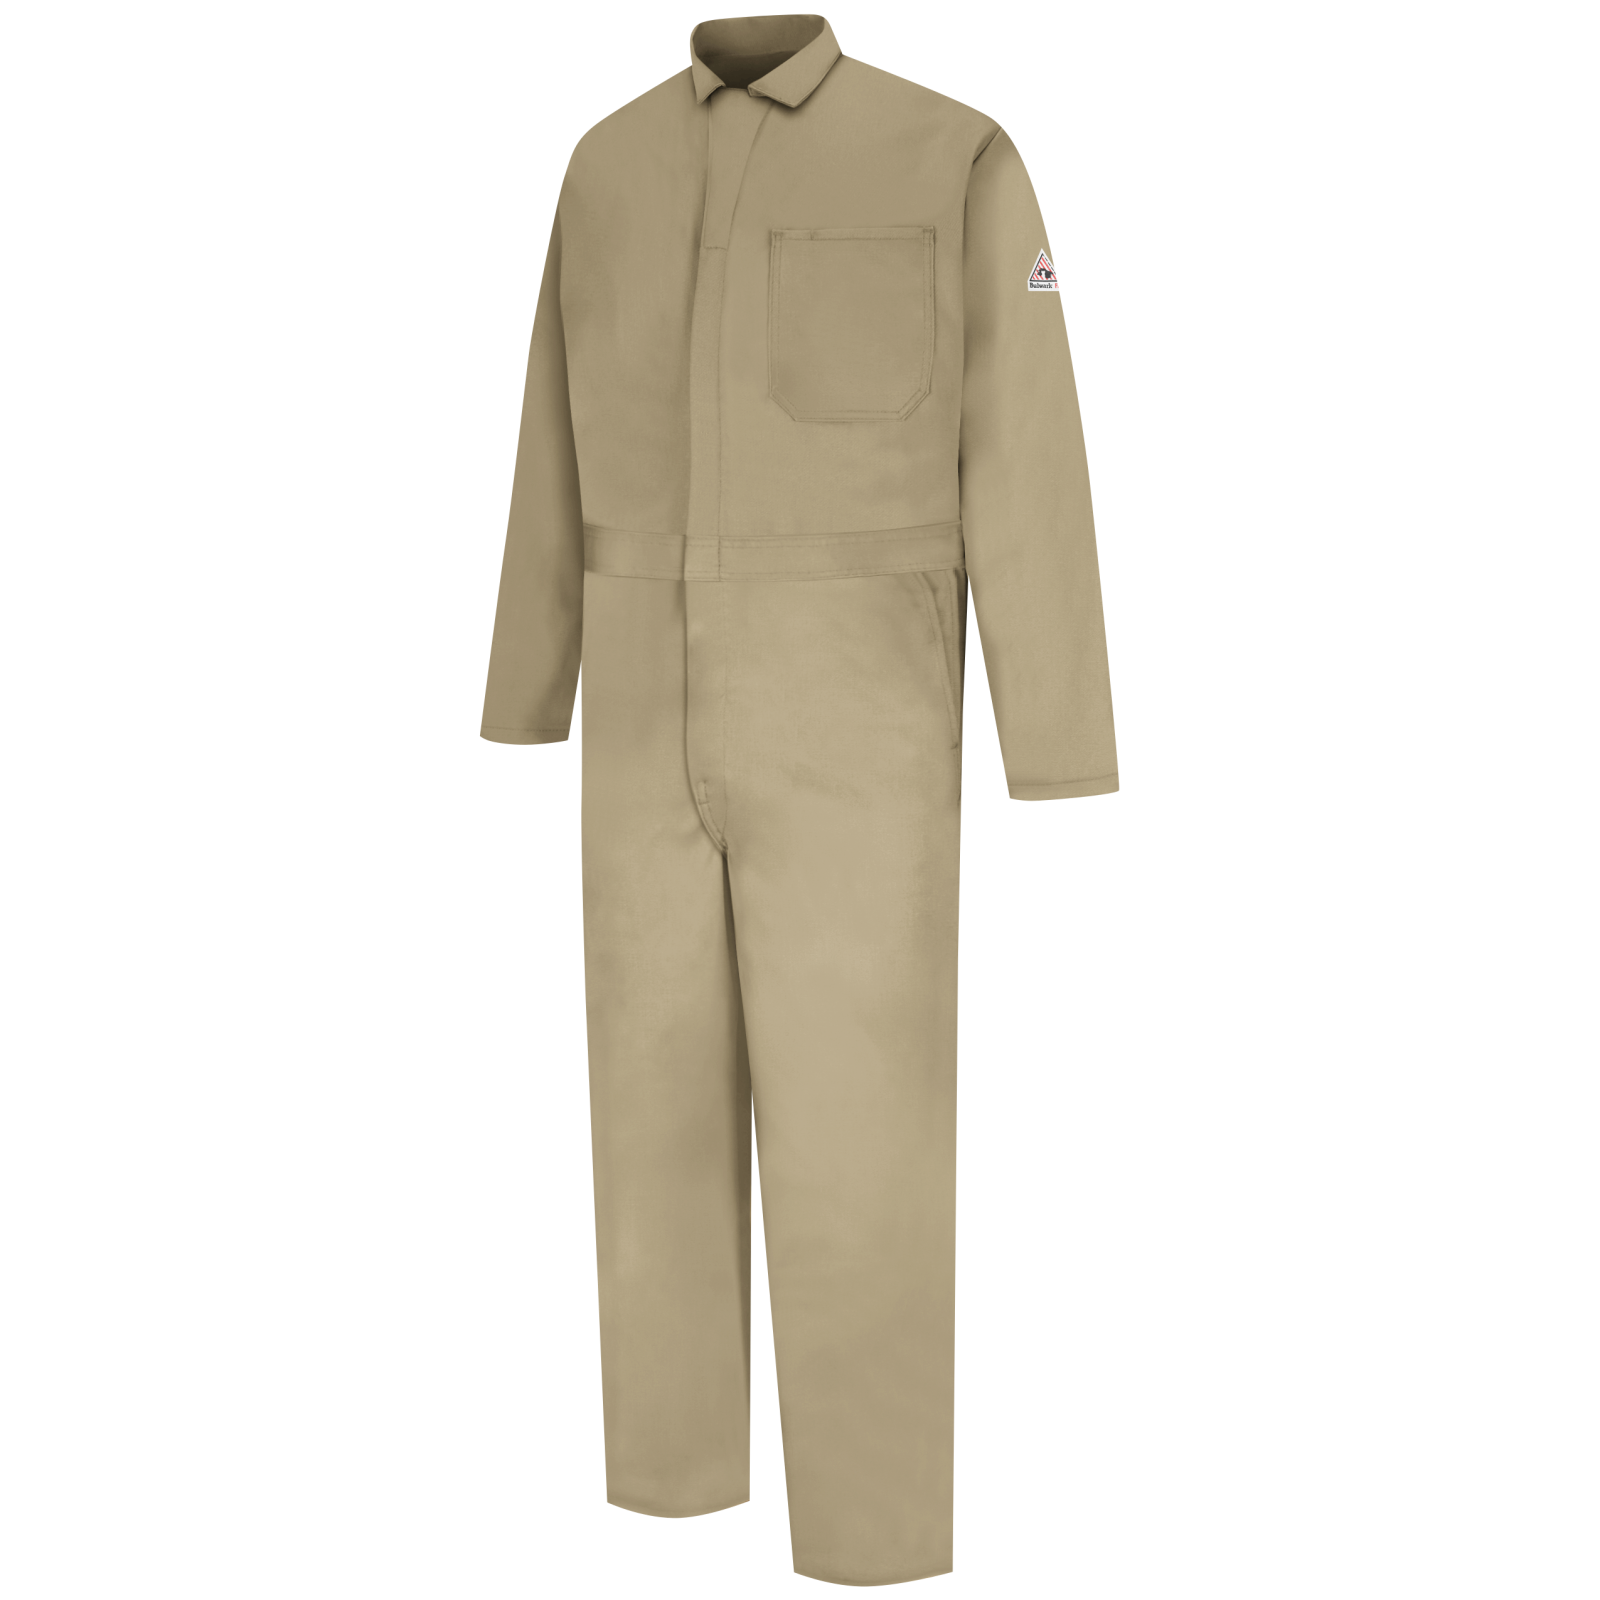 Bulwark FR Men's Midweight Excel FR Classic Coverall 